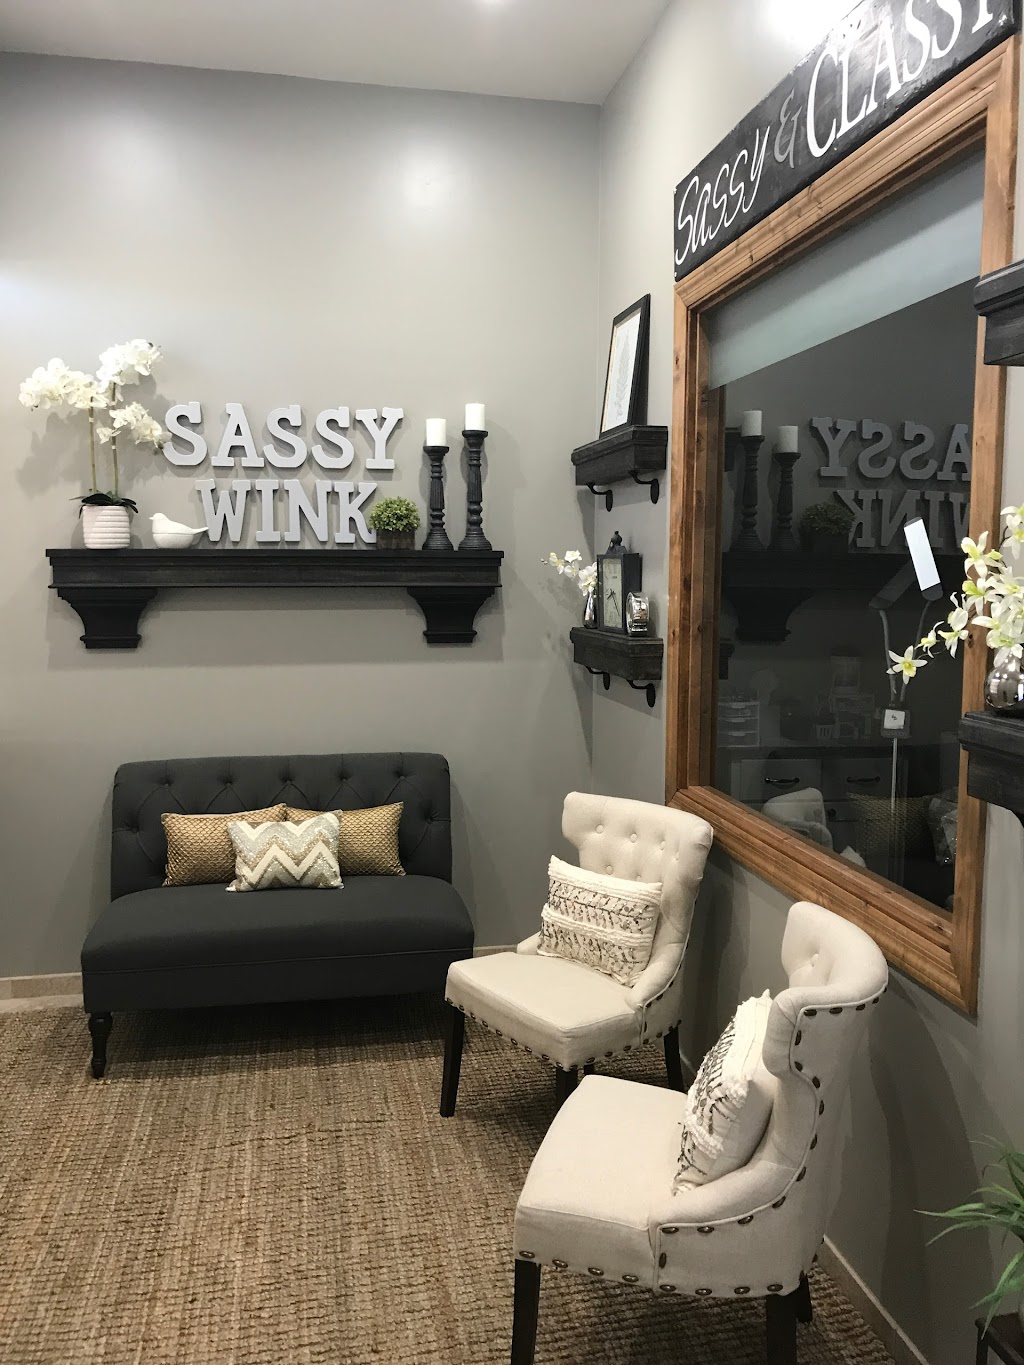 Sassy Wink Lashes, Microblading and Permanent Makeup | 6730 E McDowell Rd Unit 102, Scottsdale, AZ 85257, USA | Phone: (602) 748-4277